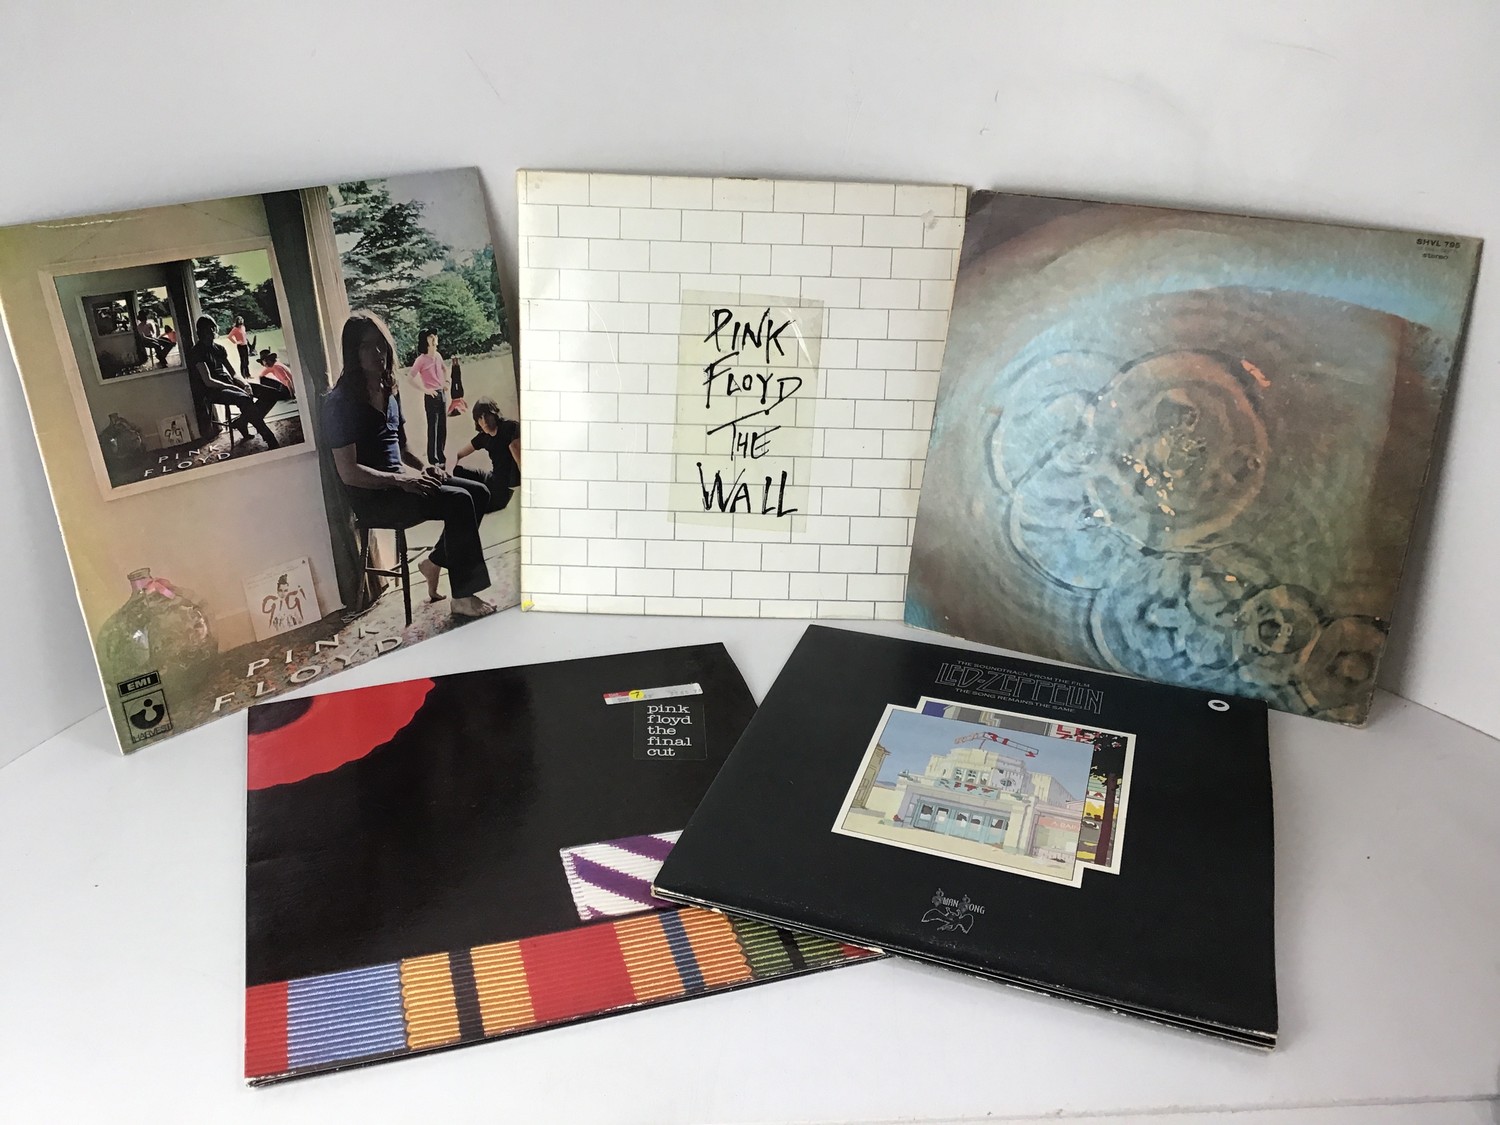 Records - LPS - 4x Pink Floyd (The Wall Early Press) and Led Zeppelin